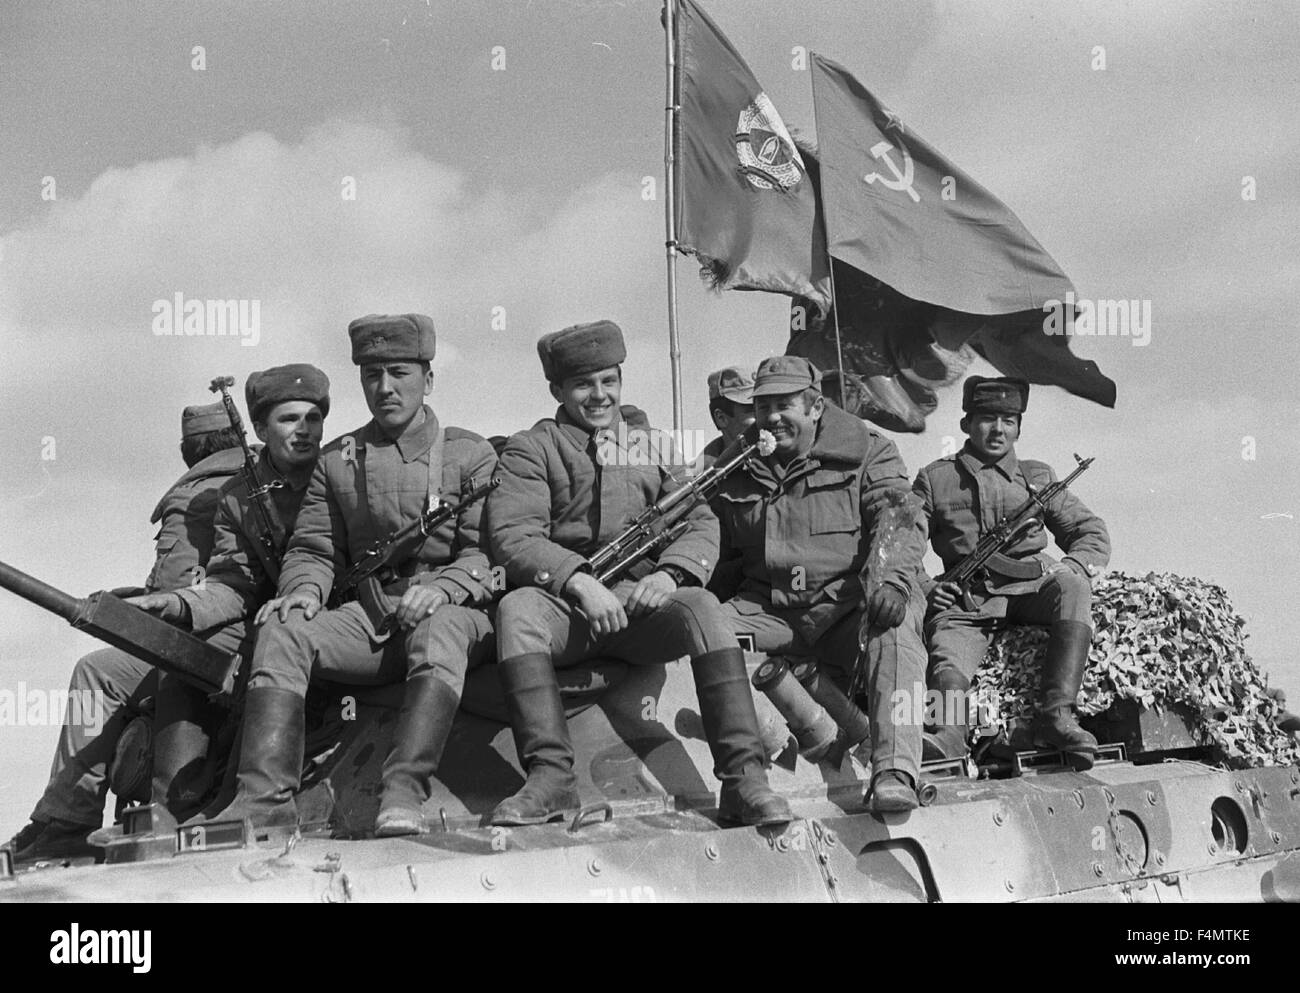 Soviet Afghanistan war - Page 6 Ussr-termez-withdrawal-of-soviet-forces-from-afghanistan-soldiers-F4MTKE